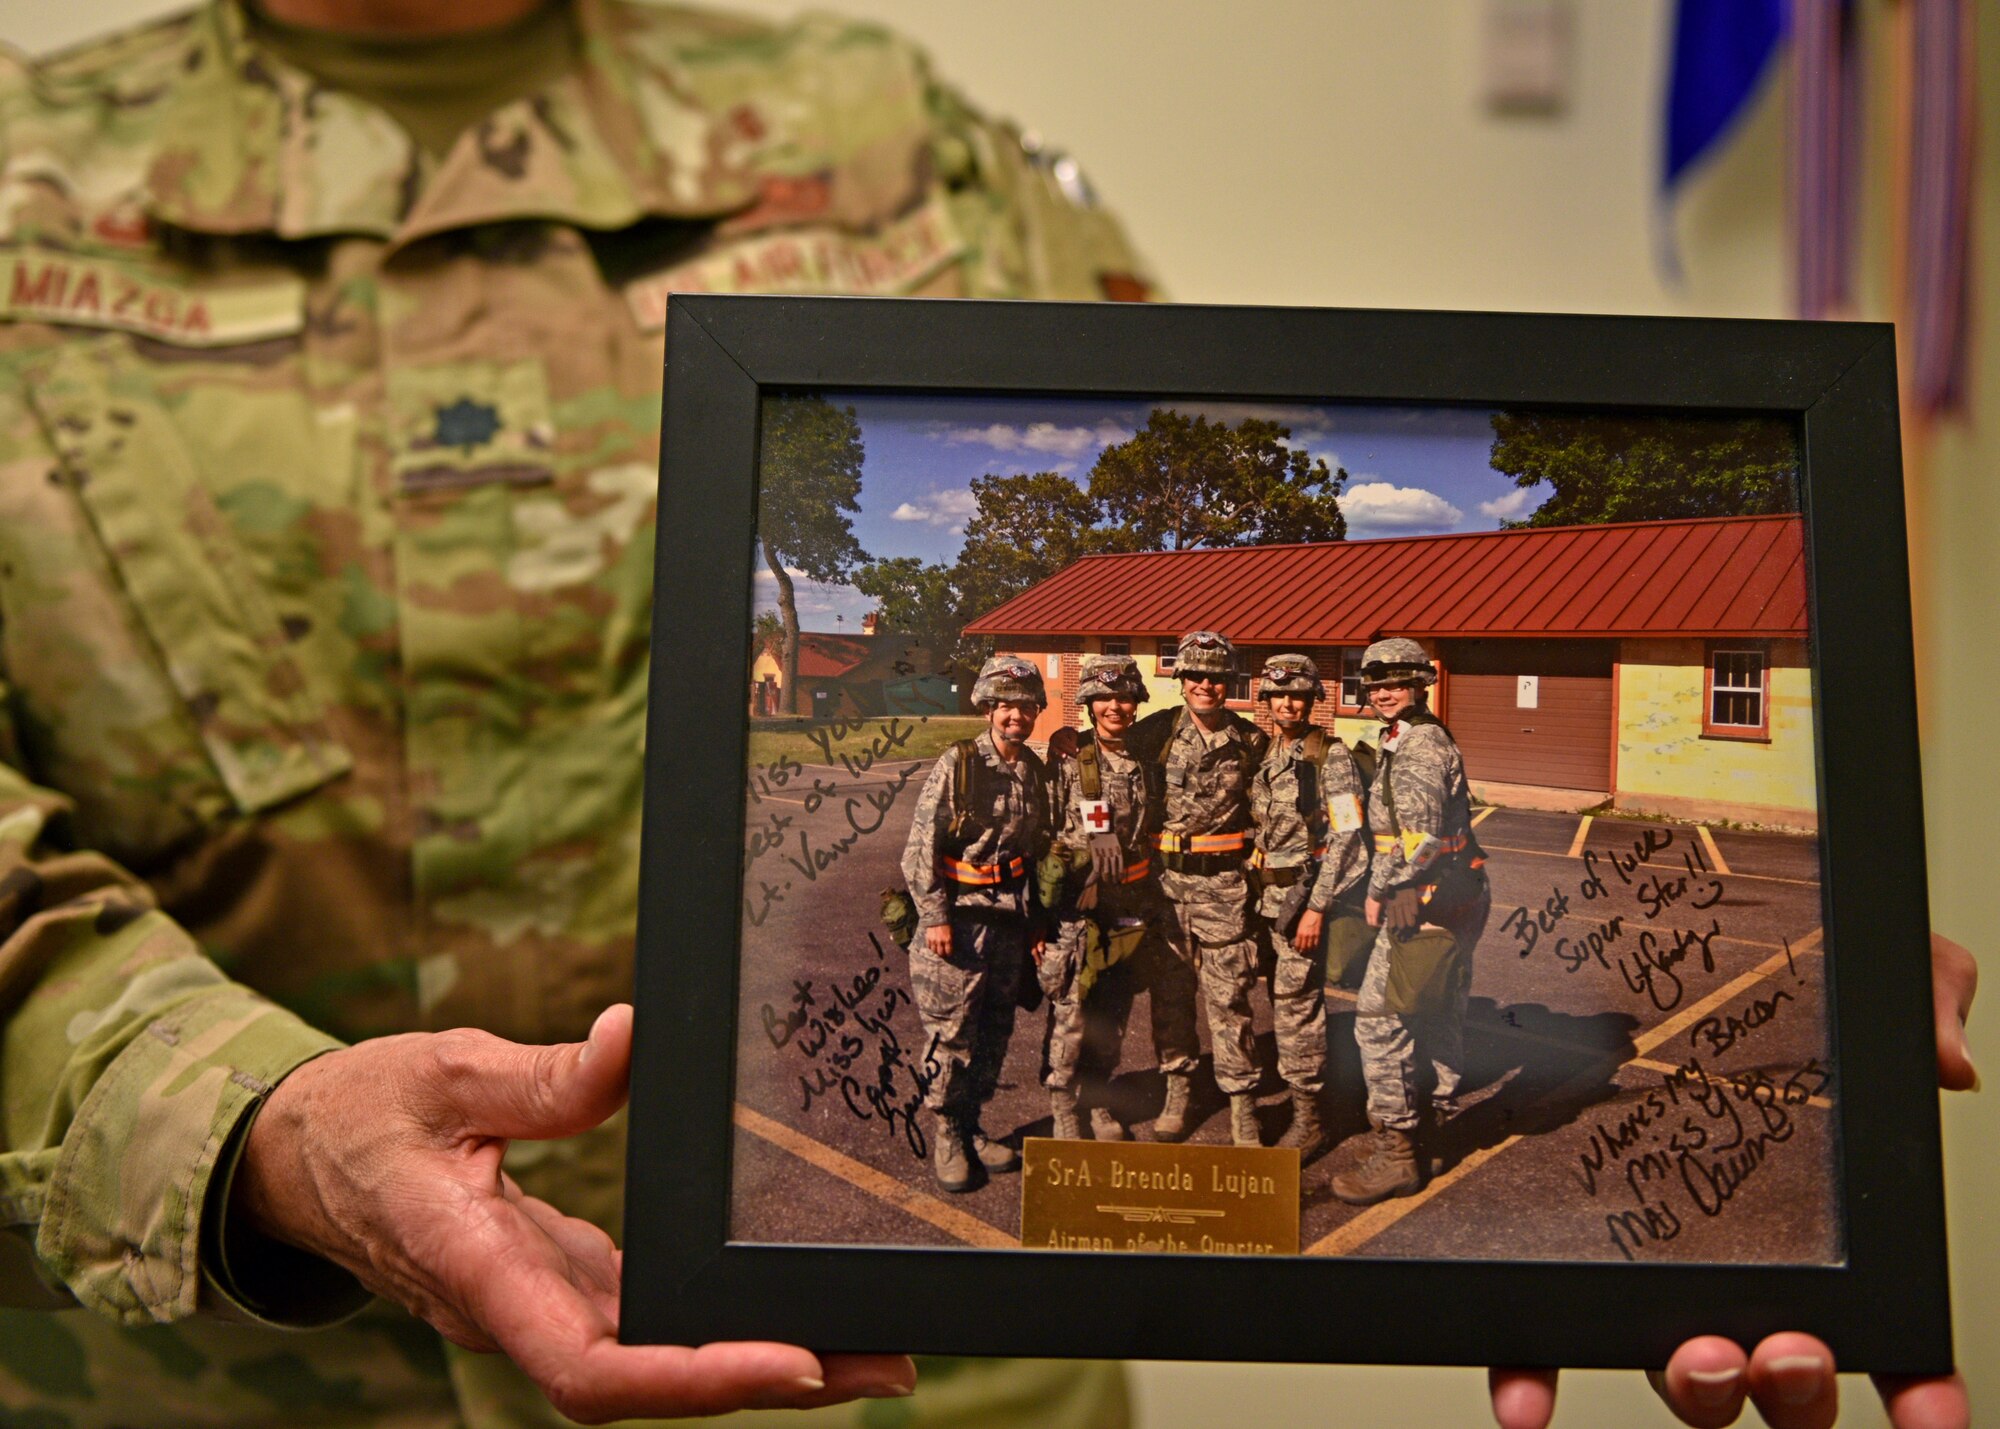 U.S. Air Force Lt. Col. Brenda Miazga, 17th Operational Medical Readiness Squadron commander, shows a photo of when she was an enlisted Airman, Goodfellow Air Force Base, Texas, July 12, 2022. Miazga originally enlisted into the Air Force as a C-130 guidance and control technician. (U.S. Air Force photo by Senior Airman Ashley Thrash)